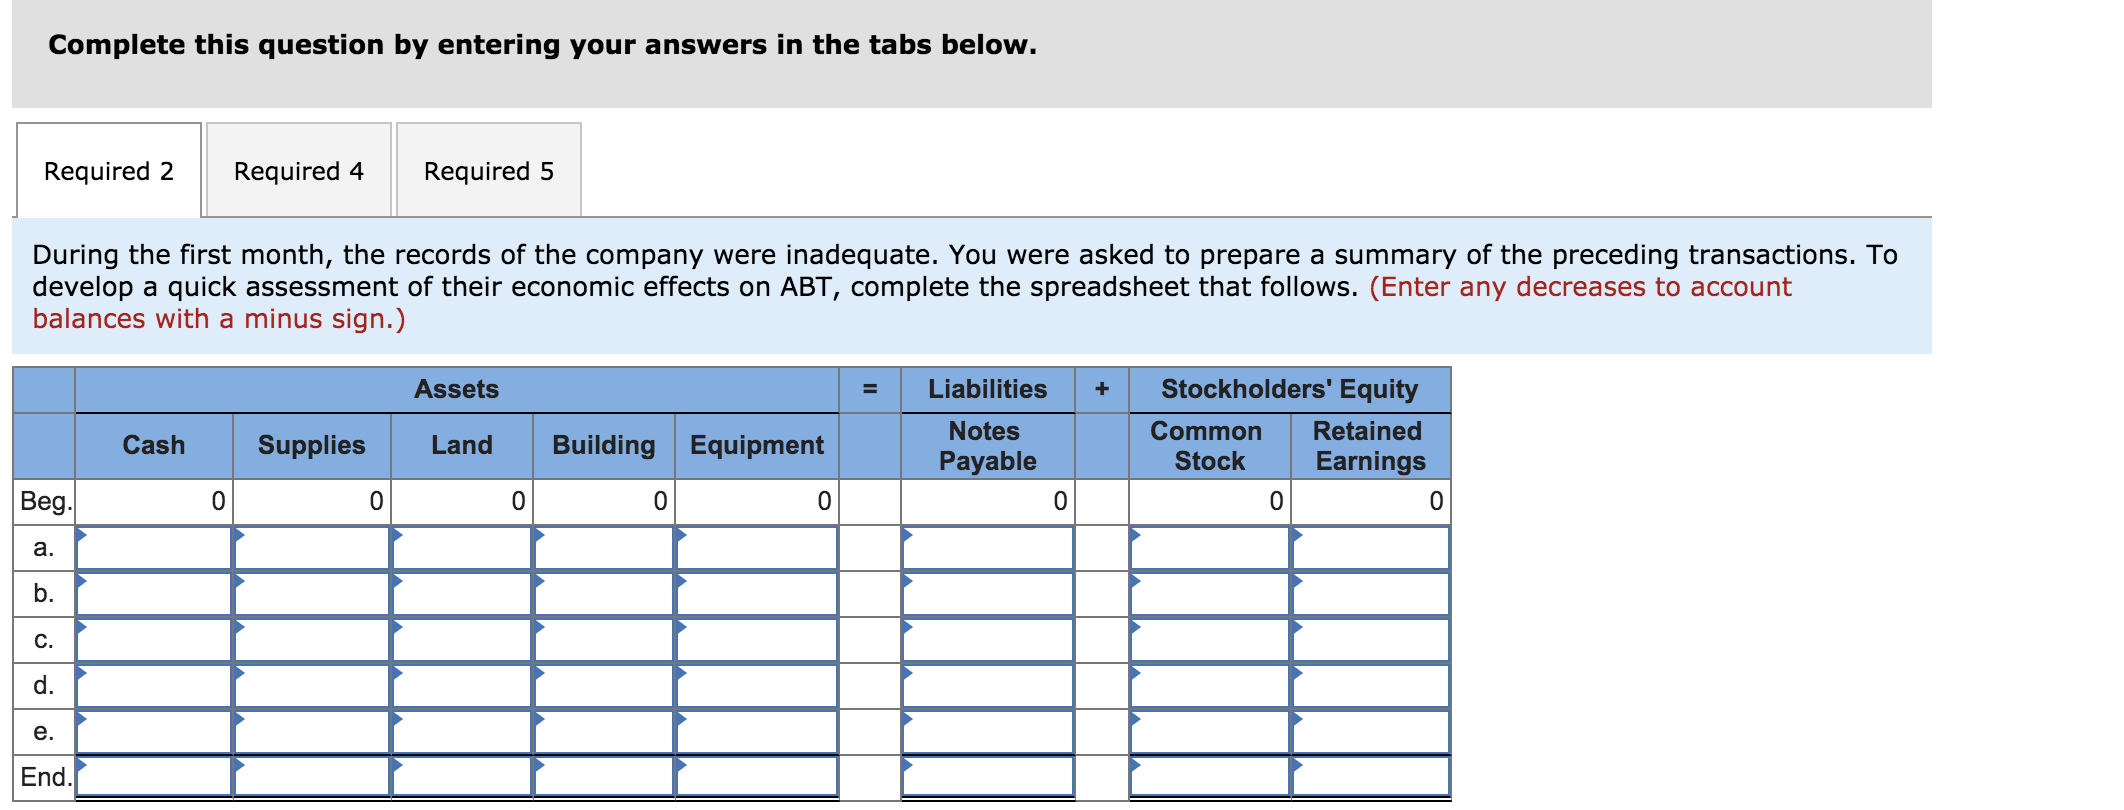 Complete this question by entering your answers in the tabs below.
Required 2
Required 4
Required 5
During the first month, the records of the company were inadequate. You were asked to prepare a summary of the preceding transactions. To
develop a quick assessment of their economic effects on ABT, complete the spreadsheet that follows. (Enter any decreases to account
balances with a minus sign.)
Stockholders' Equity
Assets
Liabilities
Retained
Notes
Common
Cash
Supplies
Land
Building Equipment
Payable
Stock
Earnings
Begд.
a.
b.
C.
d.
e.
End.
